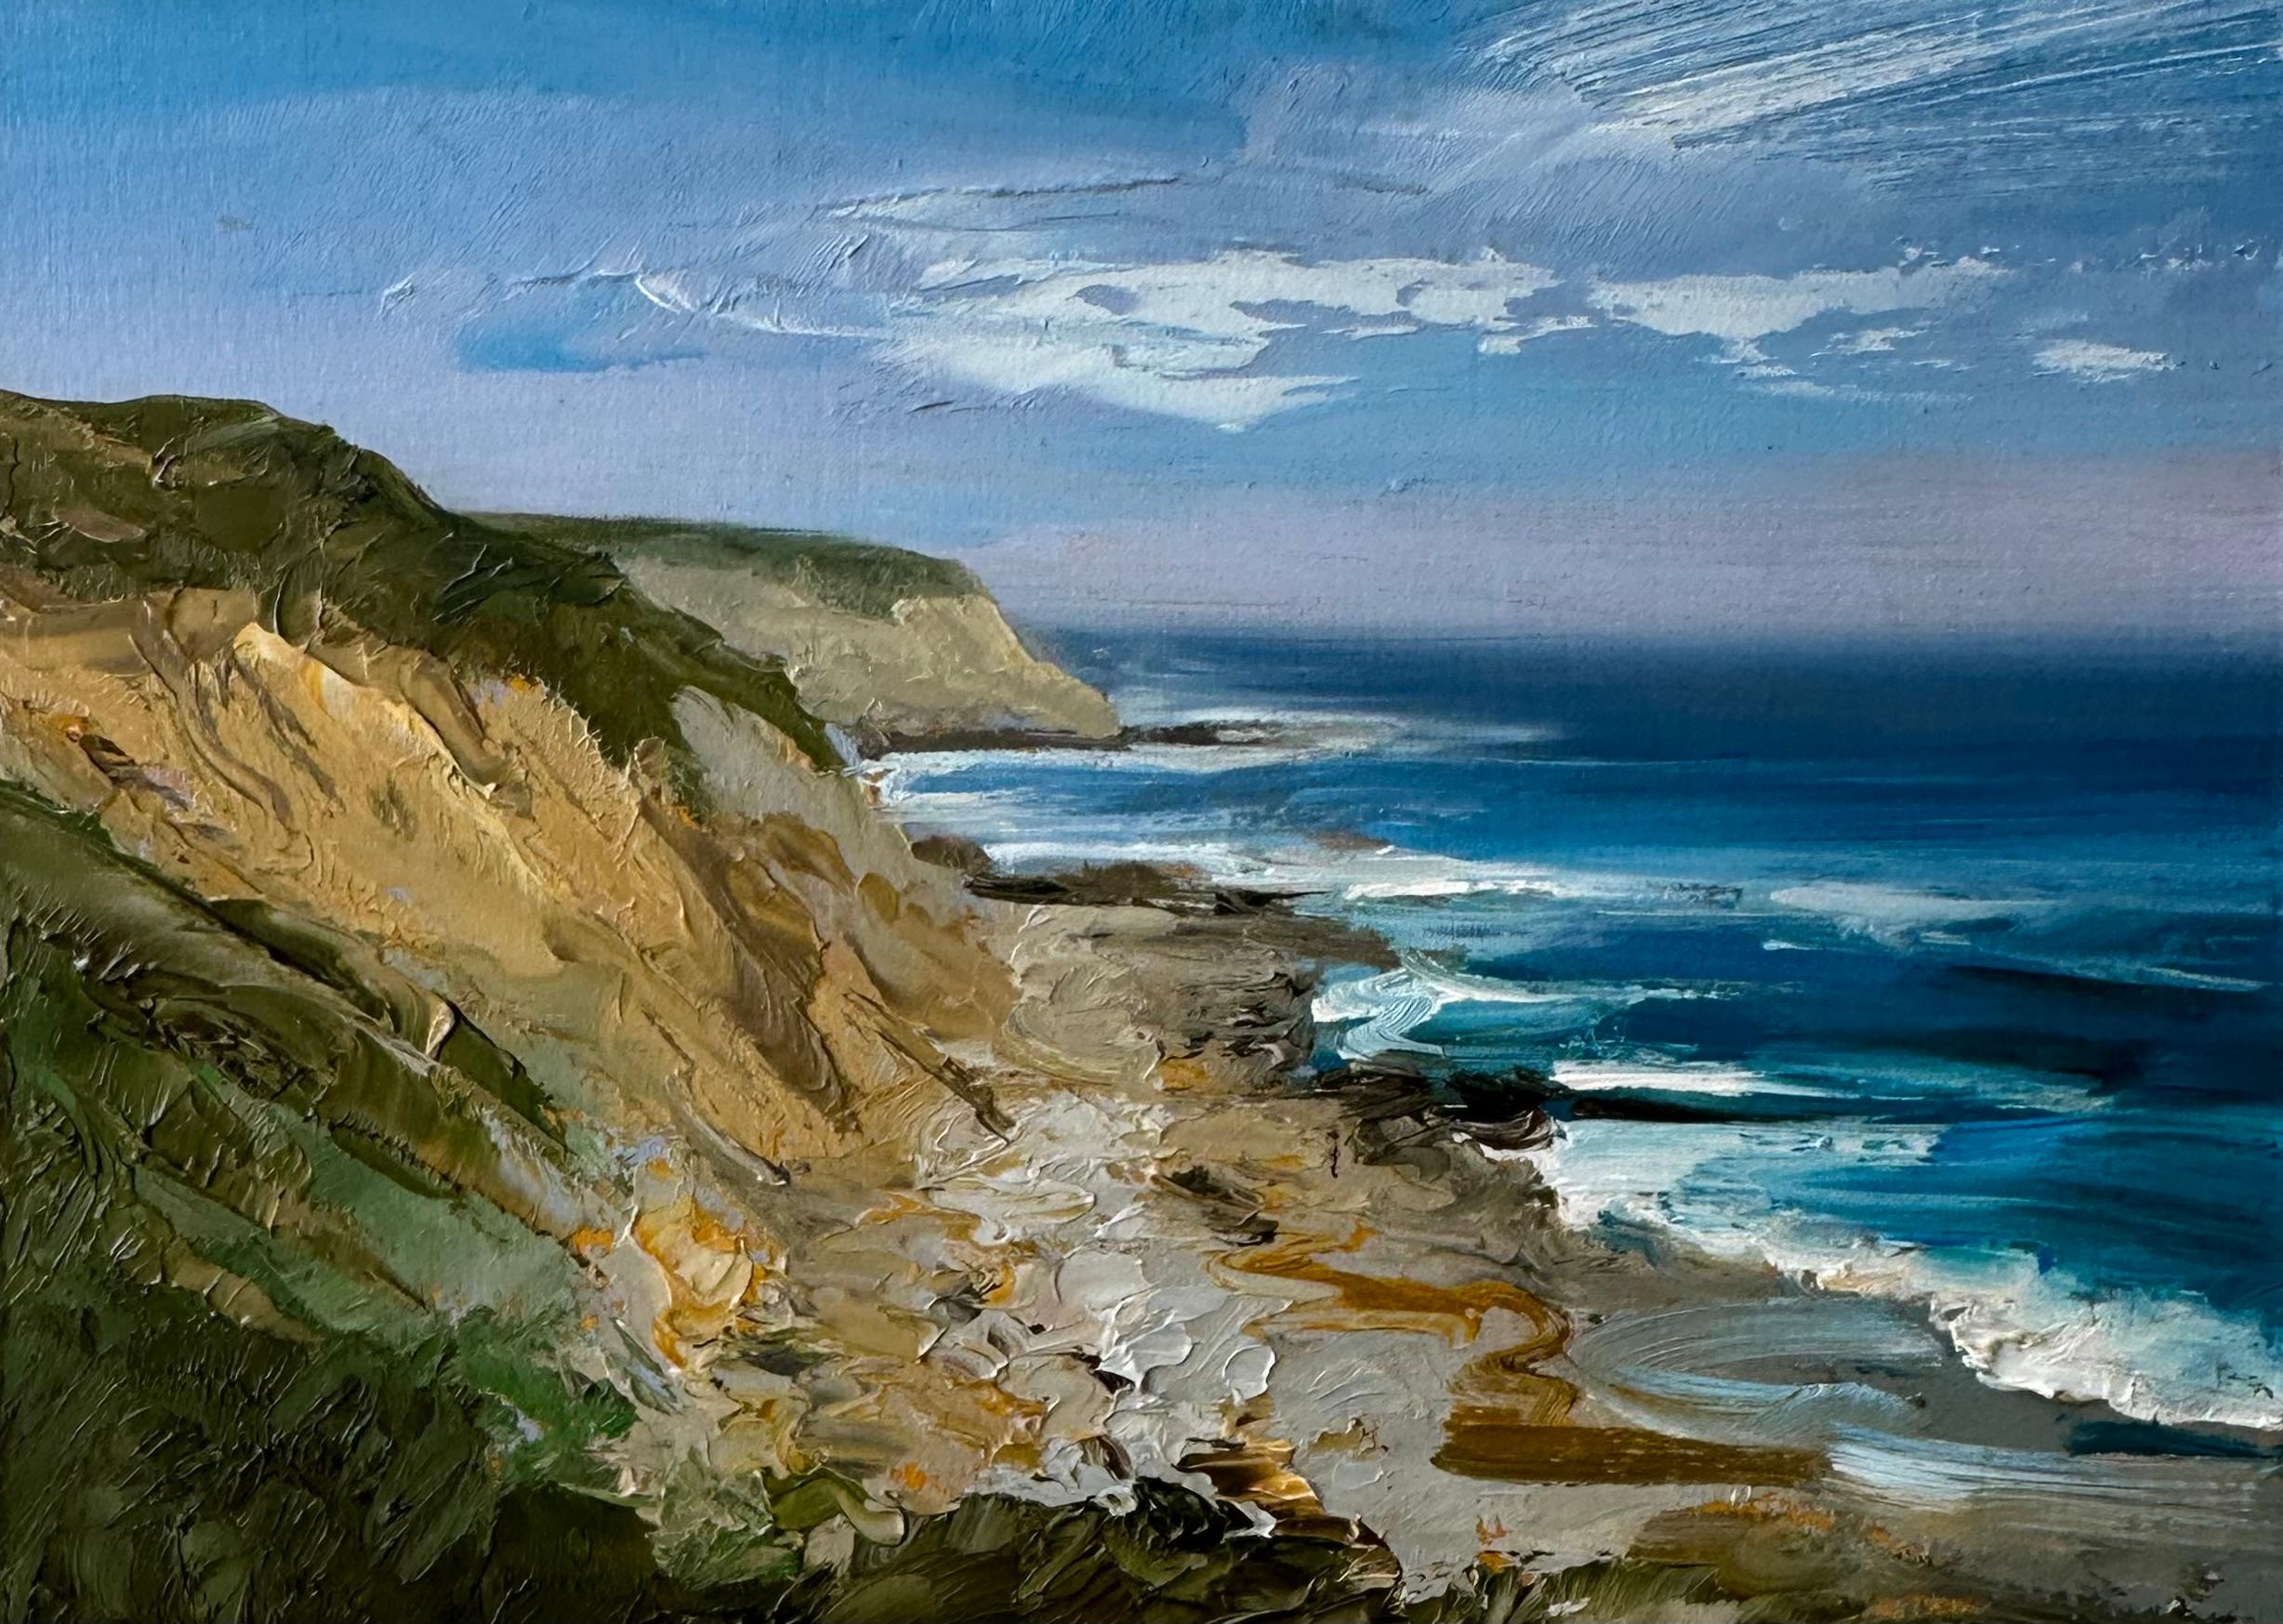 "These Days", a landscape oil painting with a picturesque cliff edge and shore